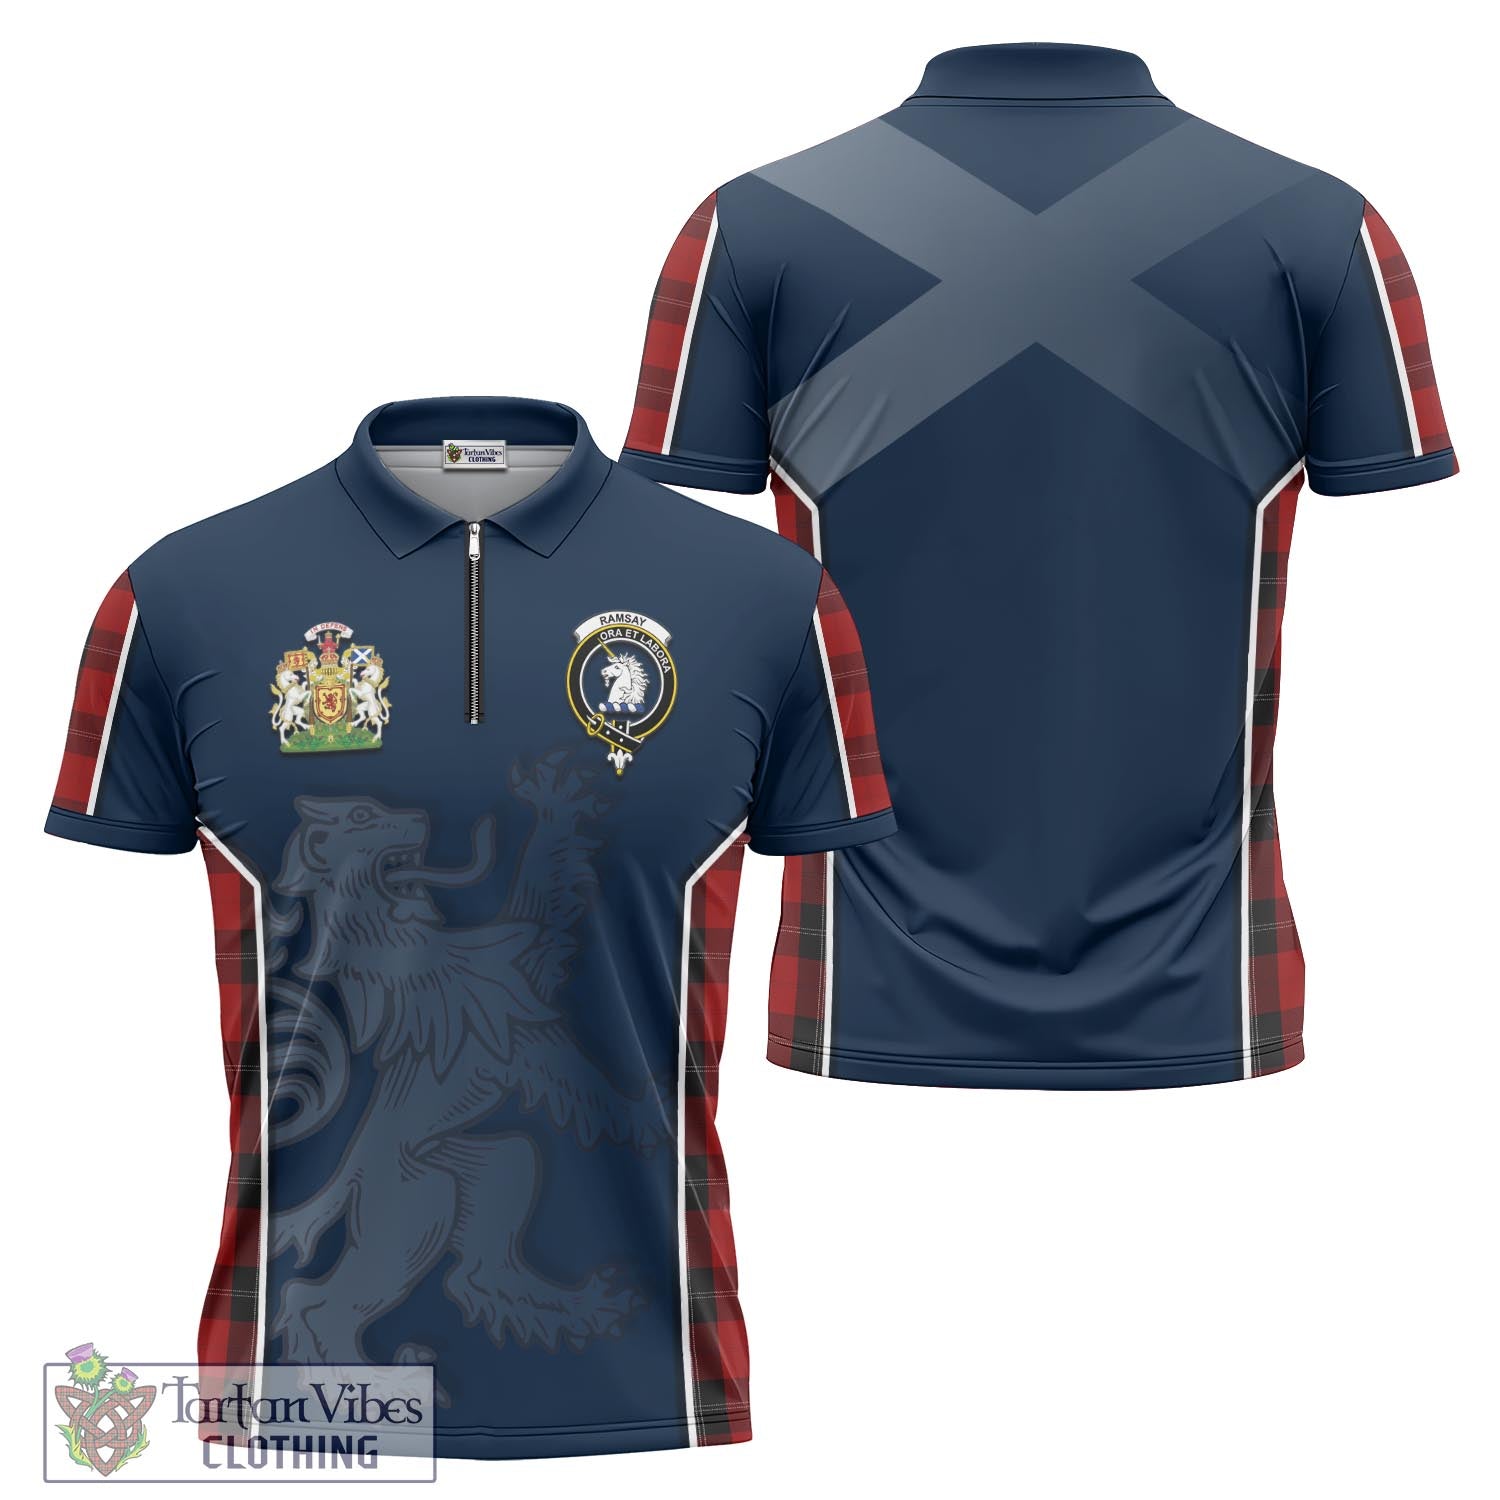 Tartan Vibes Clothing Ramsay Tartan Zipper Polo Shirt with Family Crest and Lion Rampant Vibes Sport Style